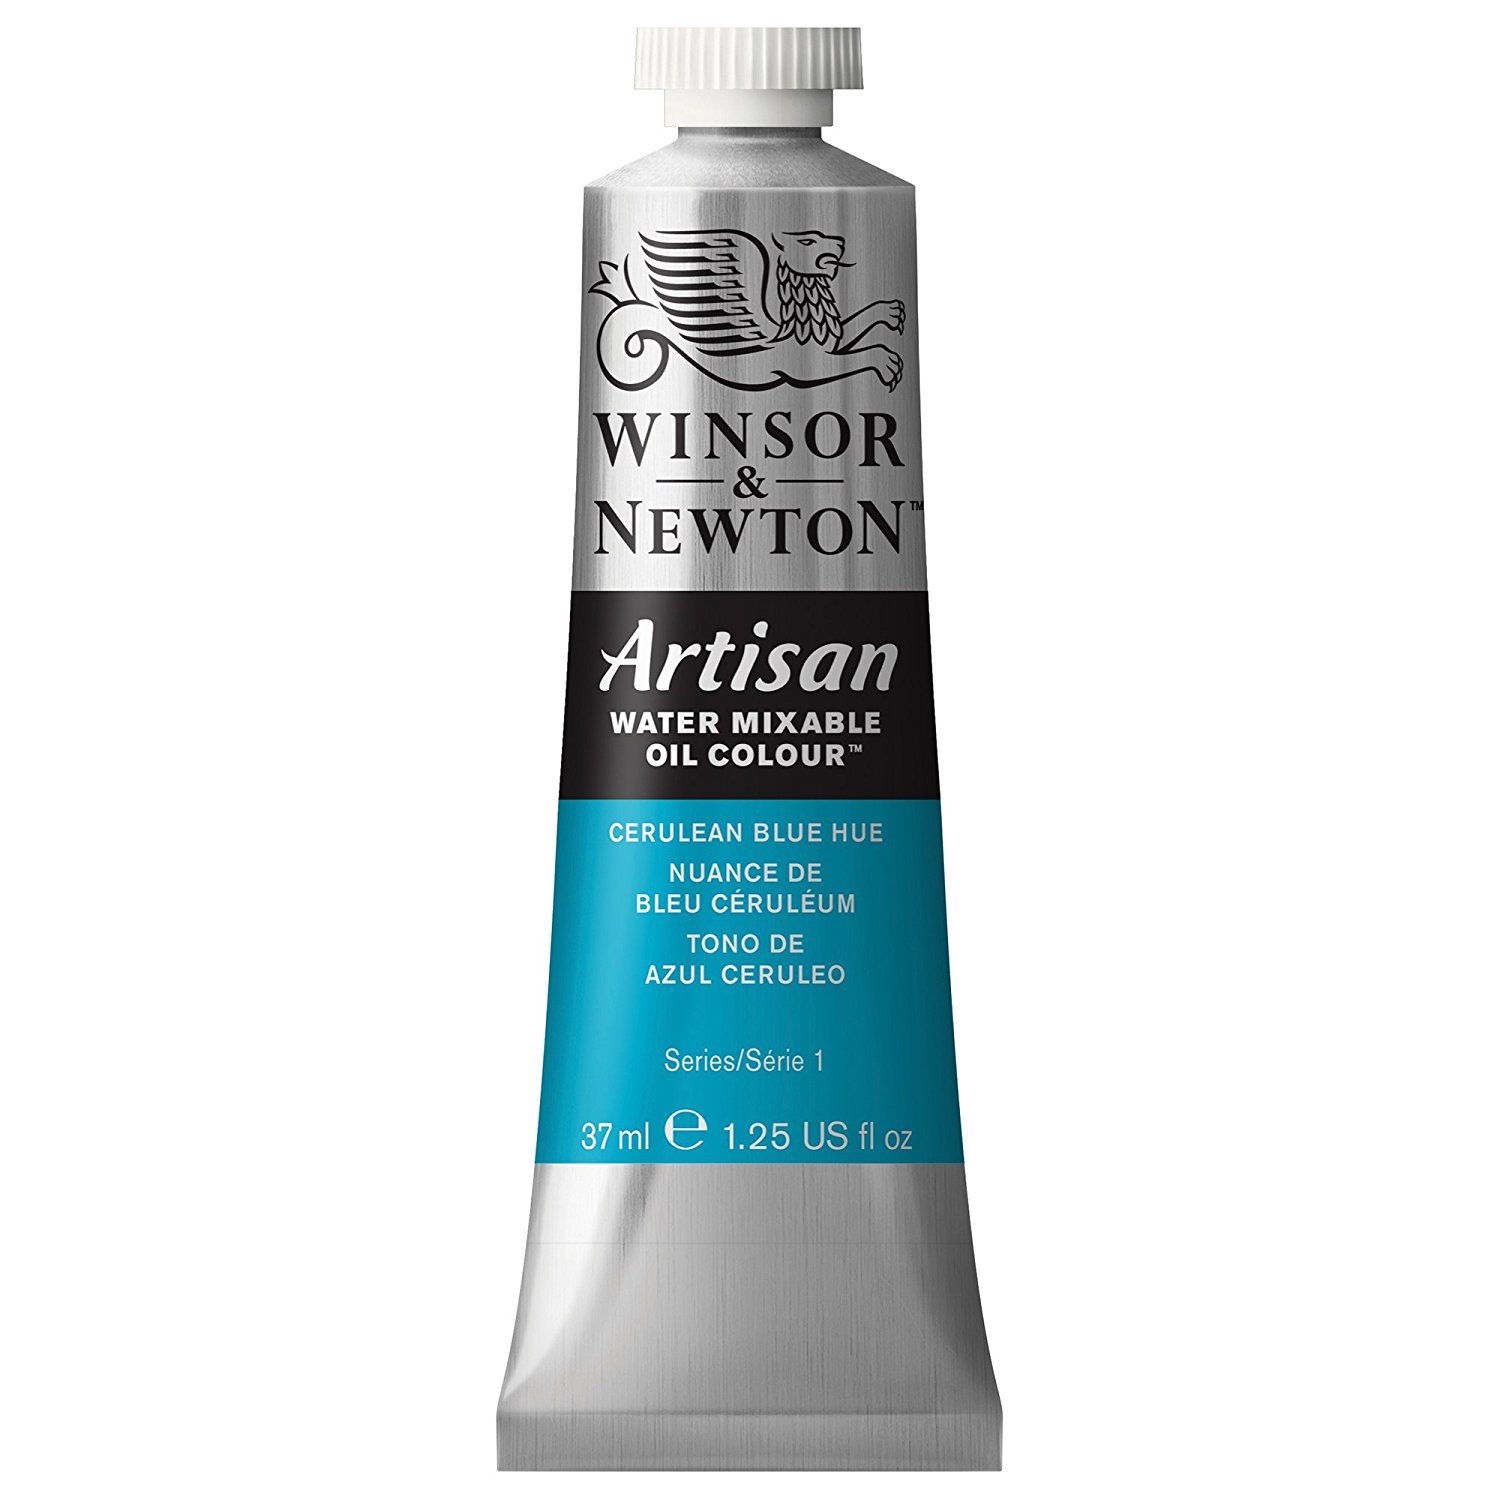 Artisan Water Mixable Oil - Cerulean Blue Hue 37ml